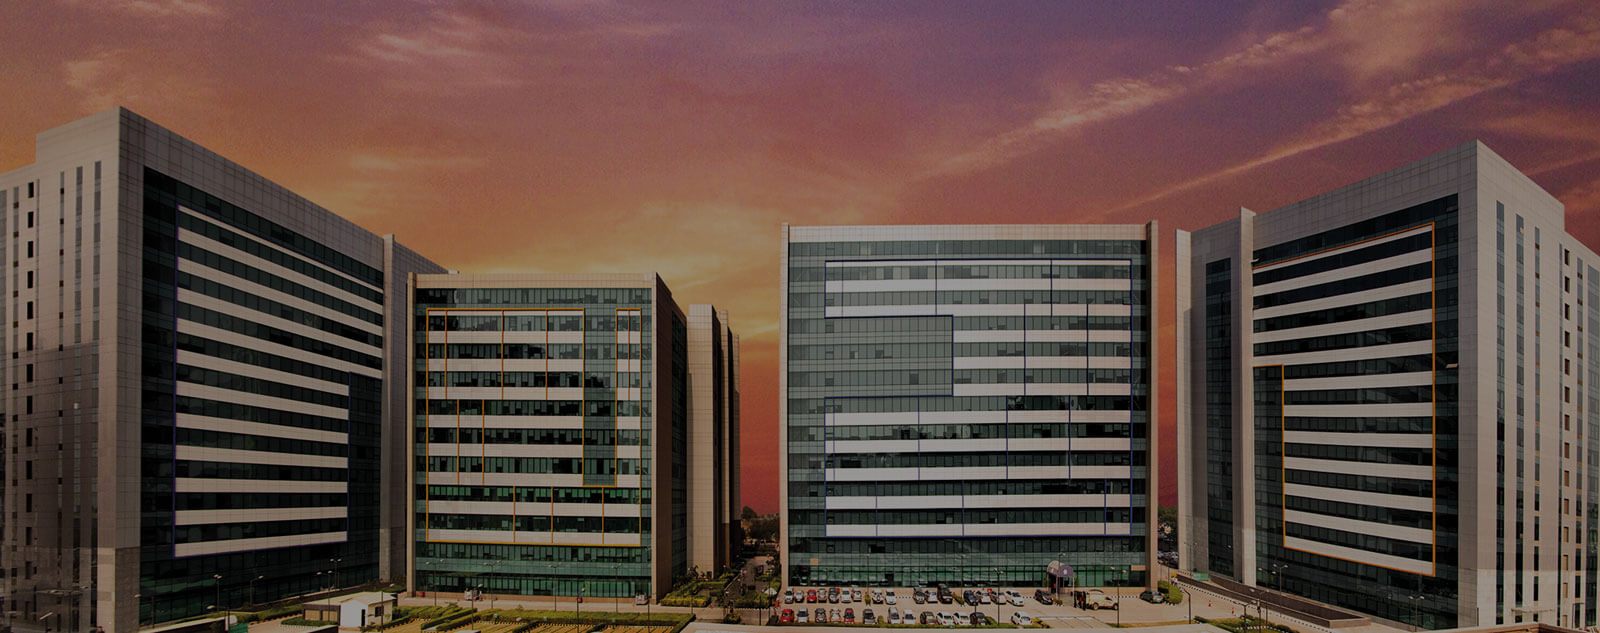 Looking for Office Space for Rent in Gurgaon. Find Commercial Office Space for Lease in Gurgaon.